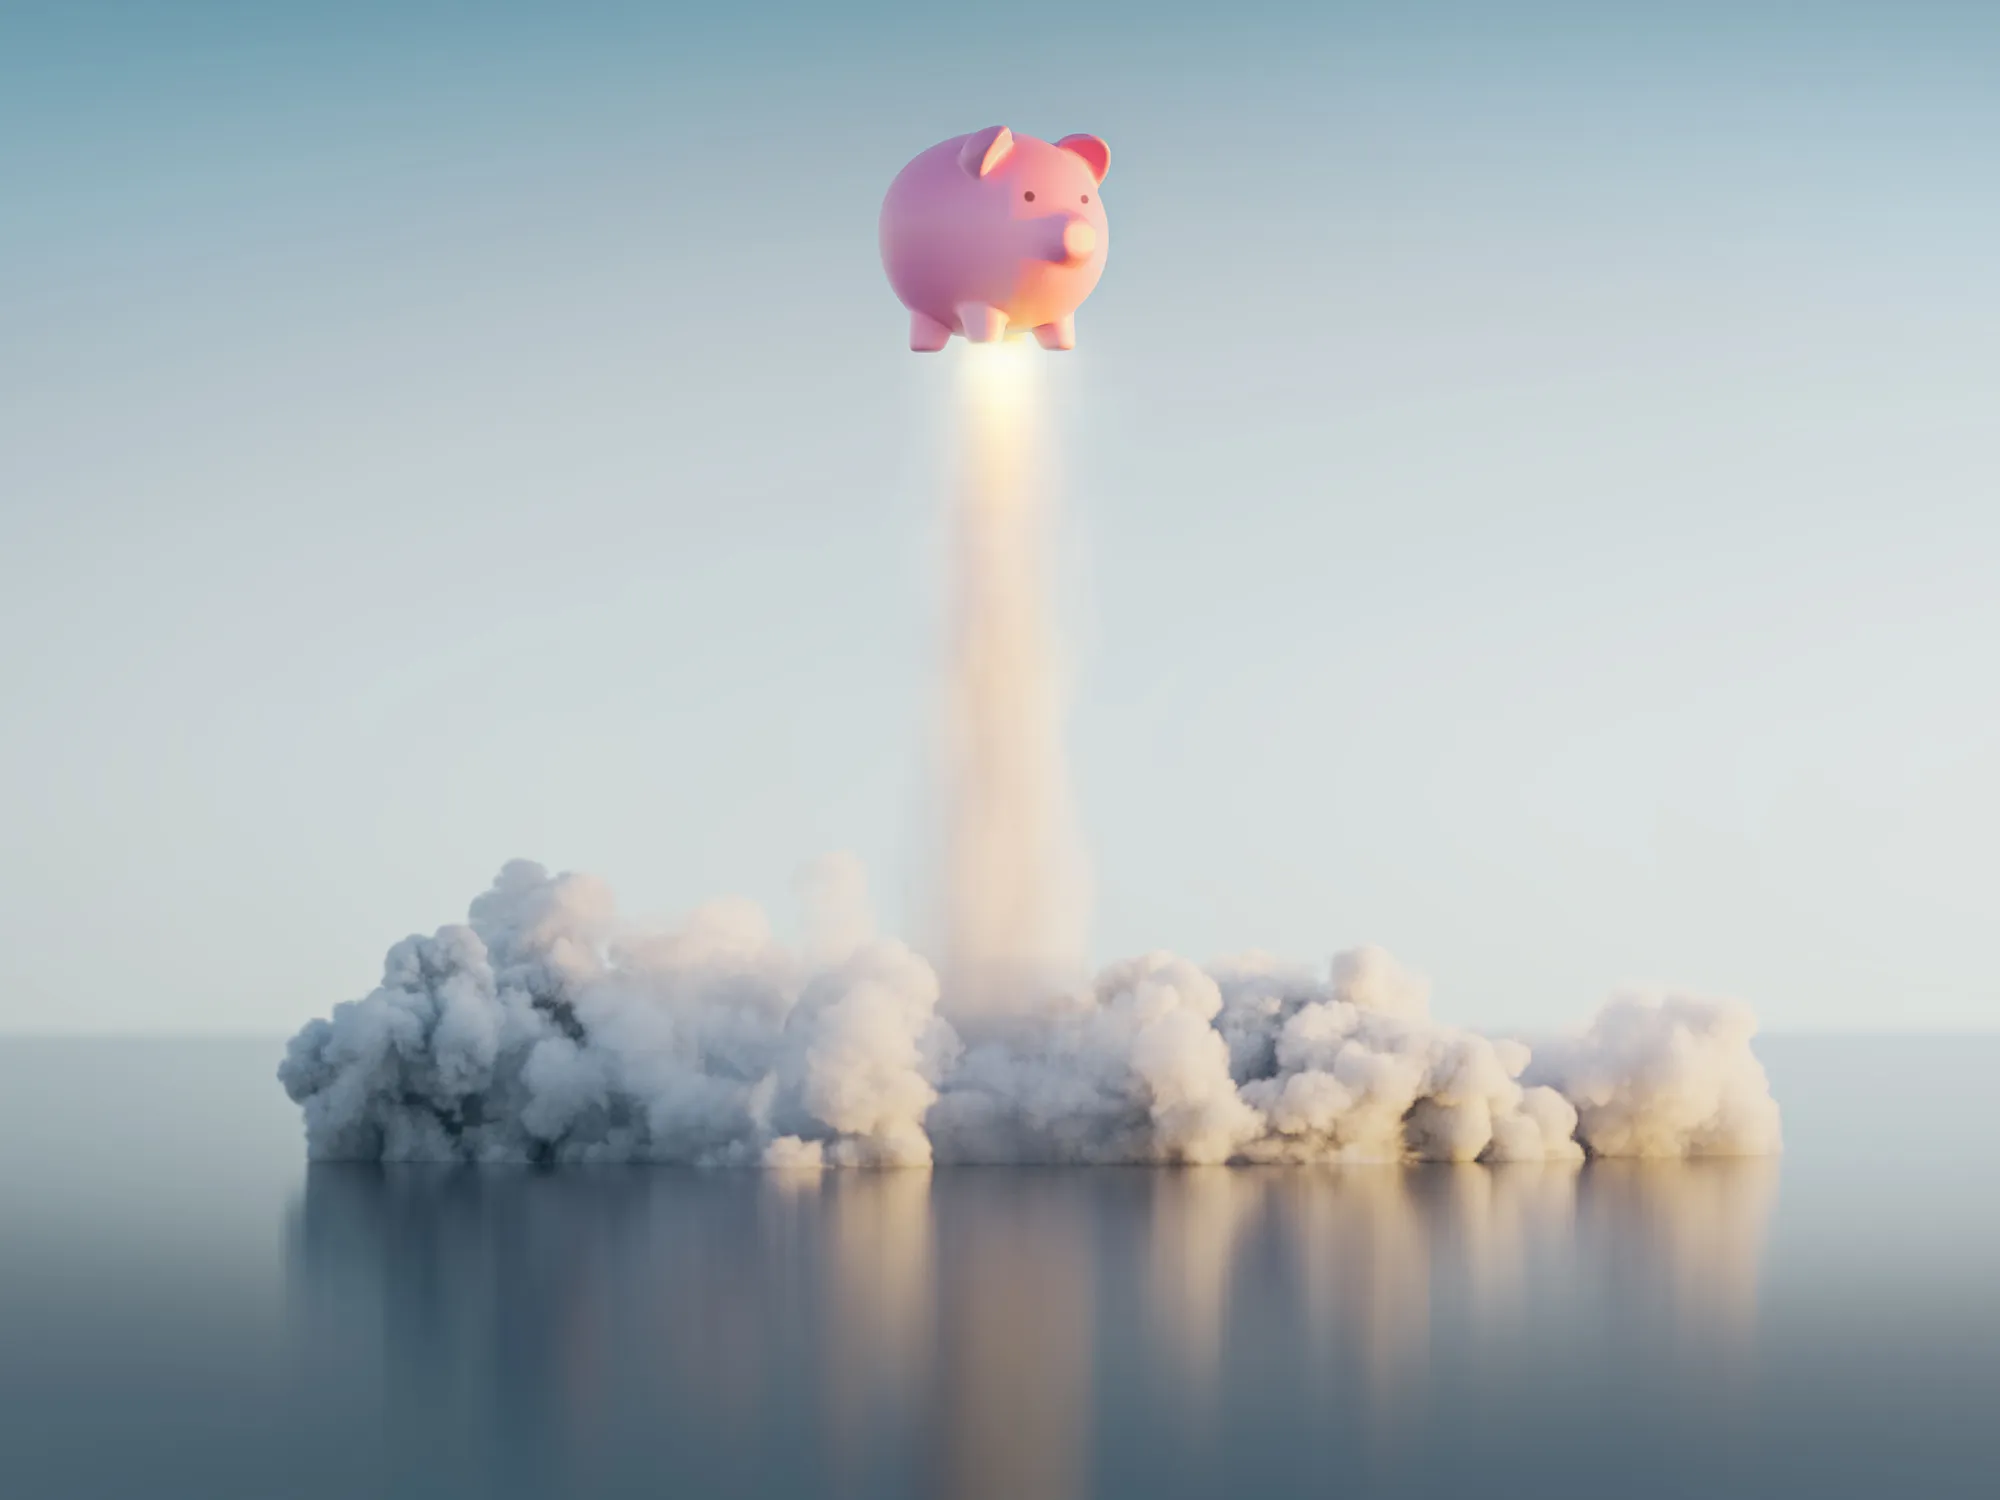 A piggy bank launching off the ground, representing the potential financial success of private equity investments.